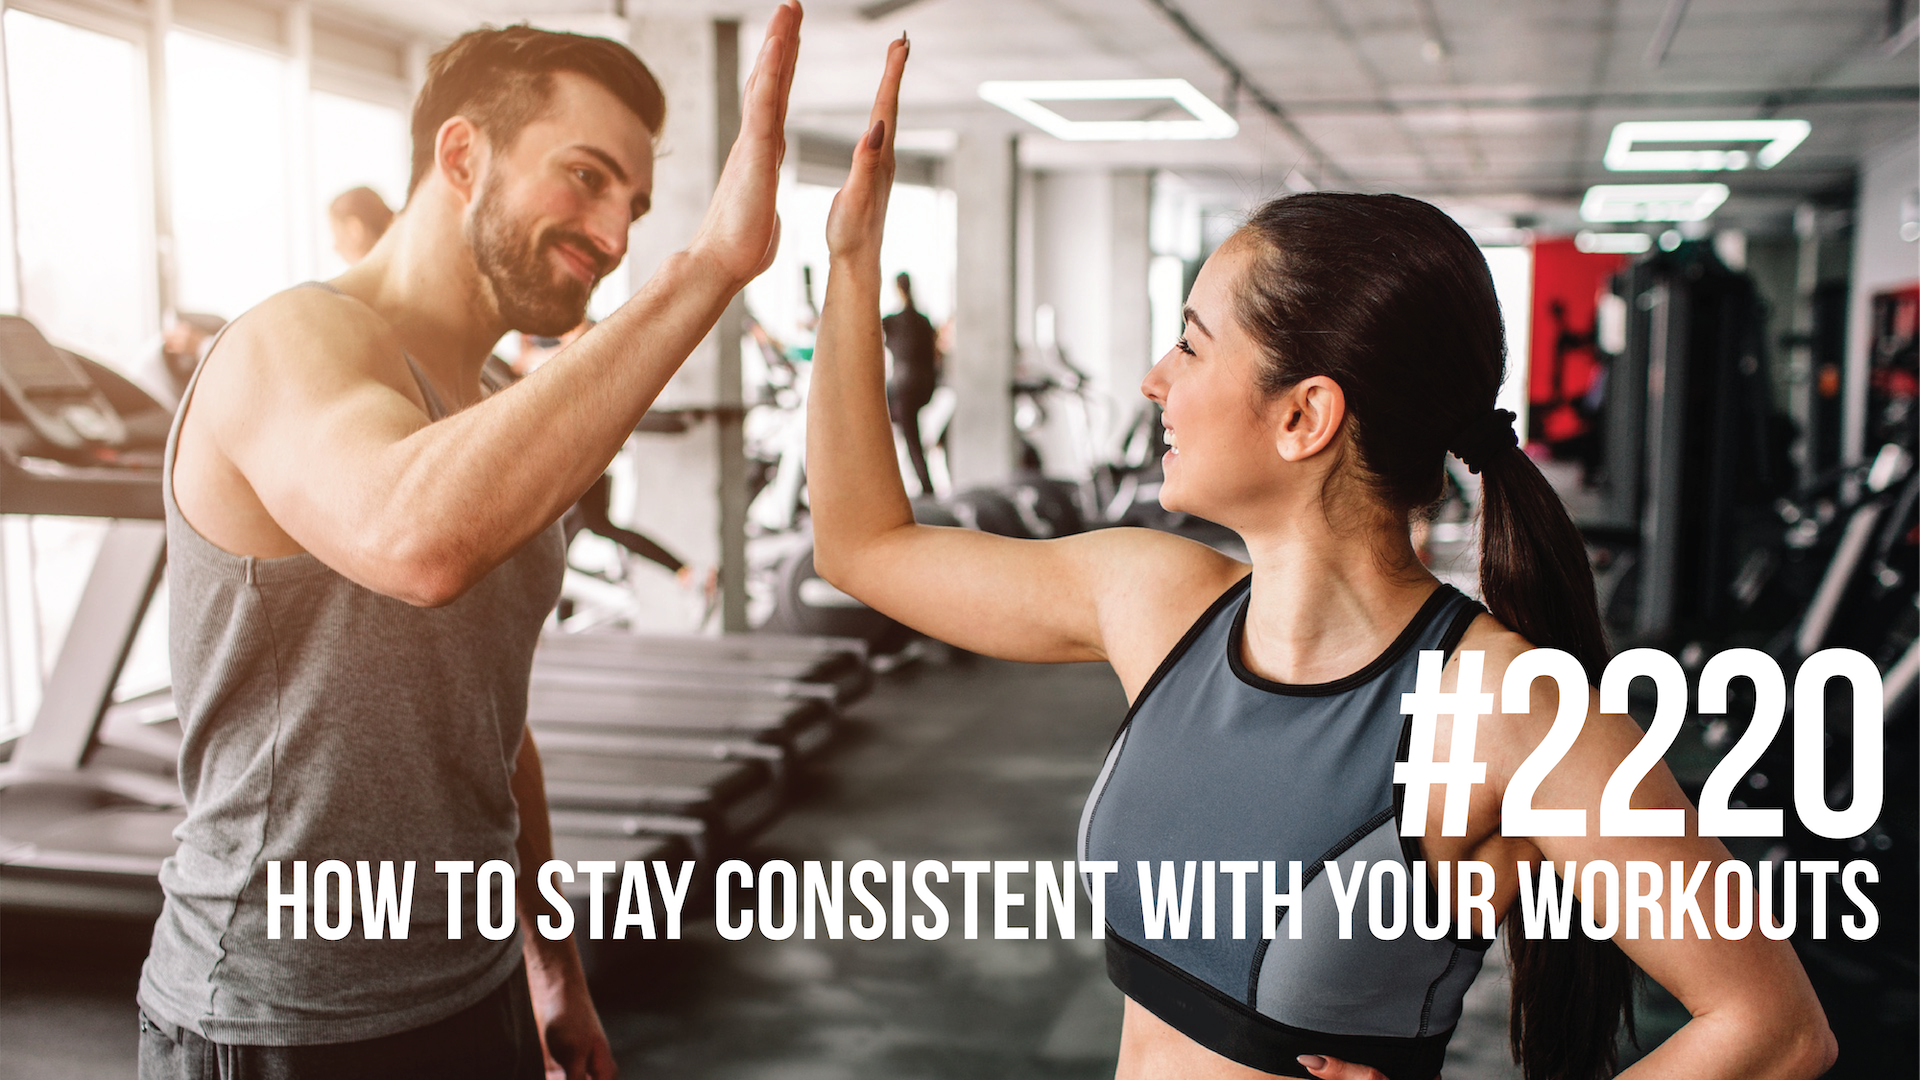 2220: How to Stay Consistent With Your Workouts